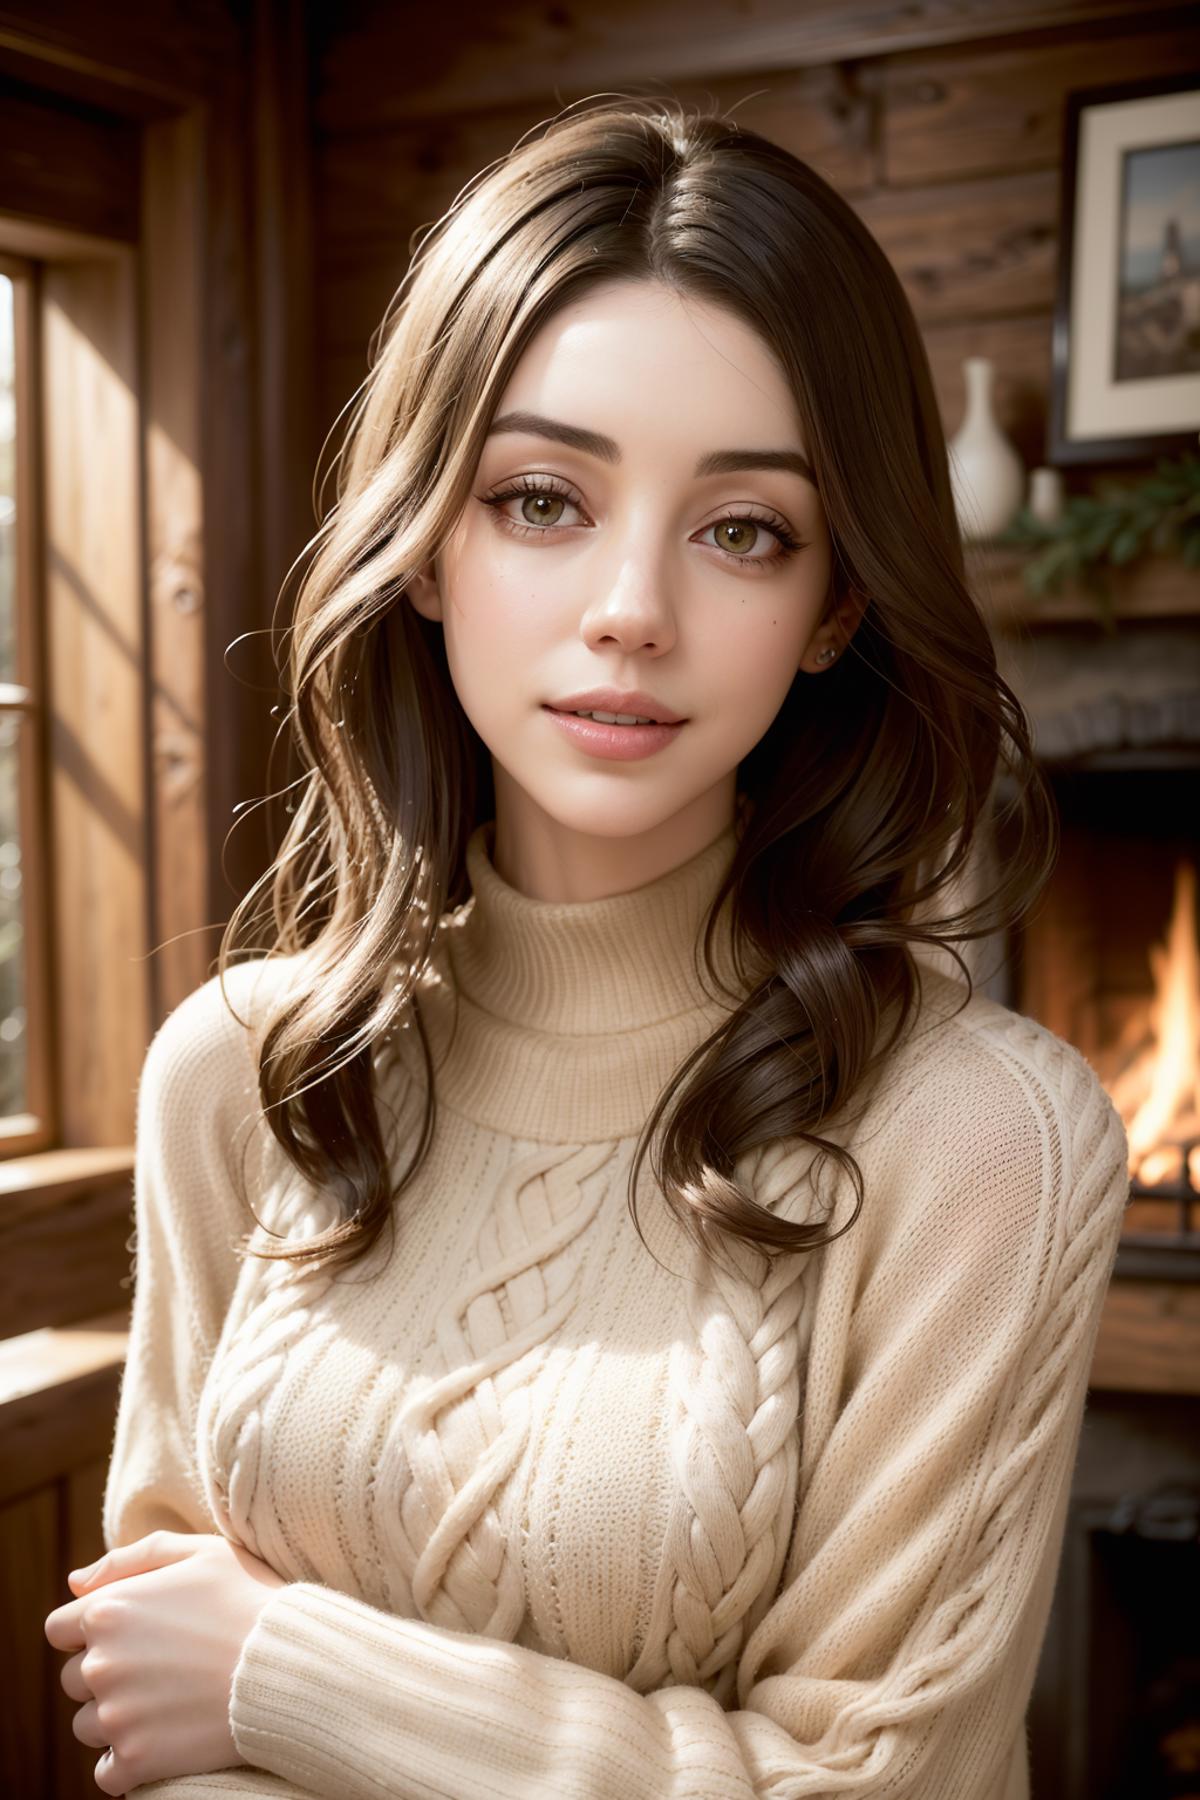 Adelaide Kane image by RubberDuckie